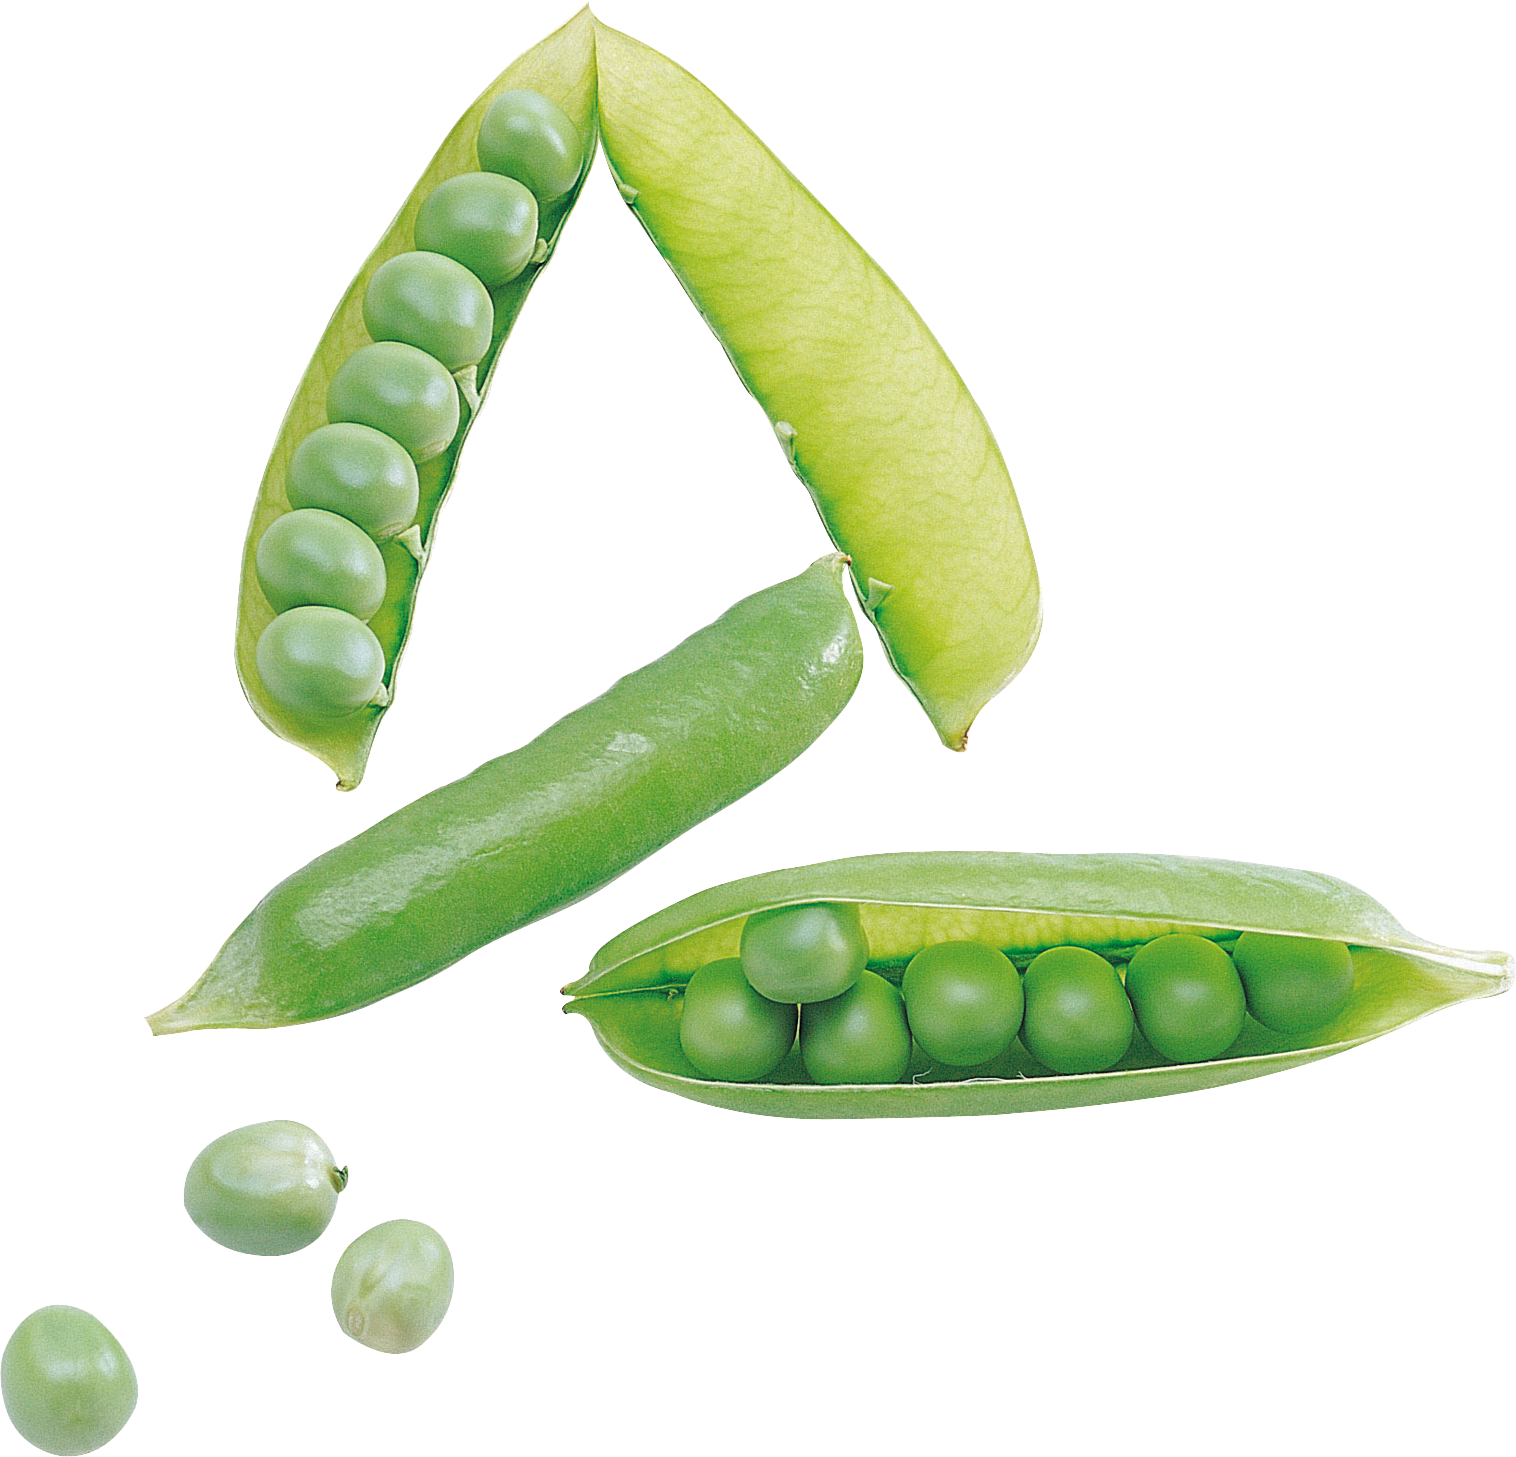 Pea png . Peas clipart winter